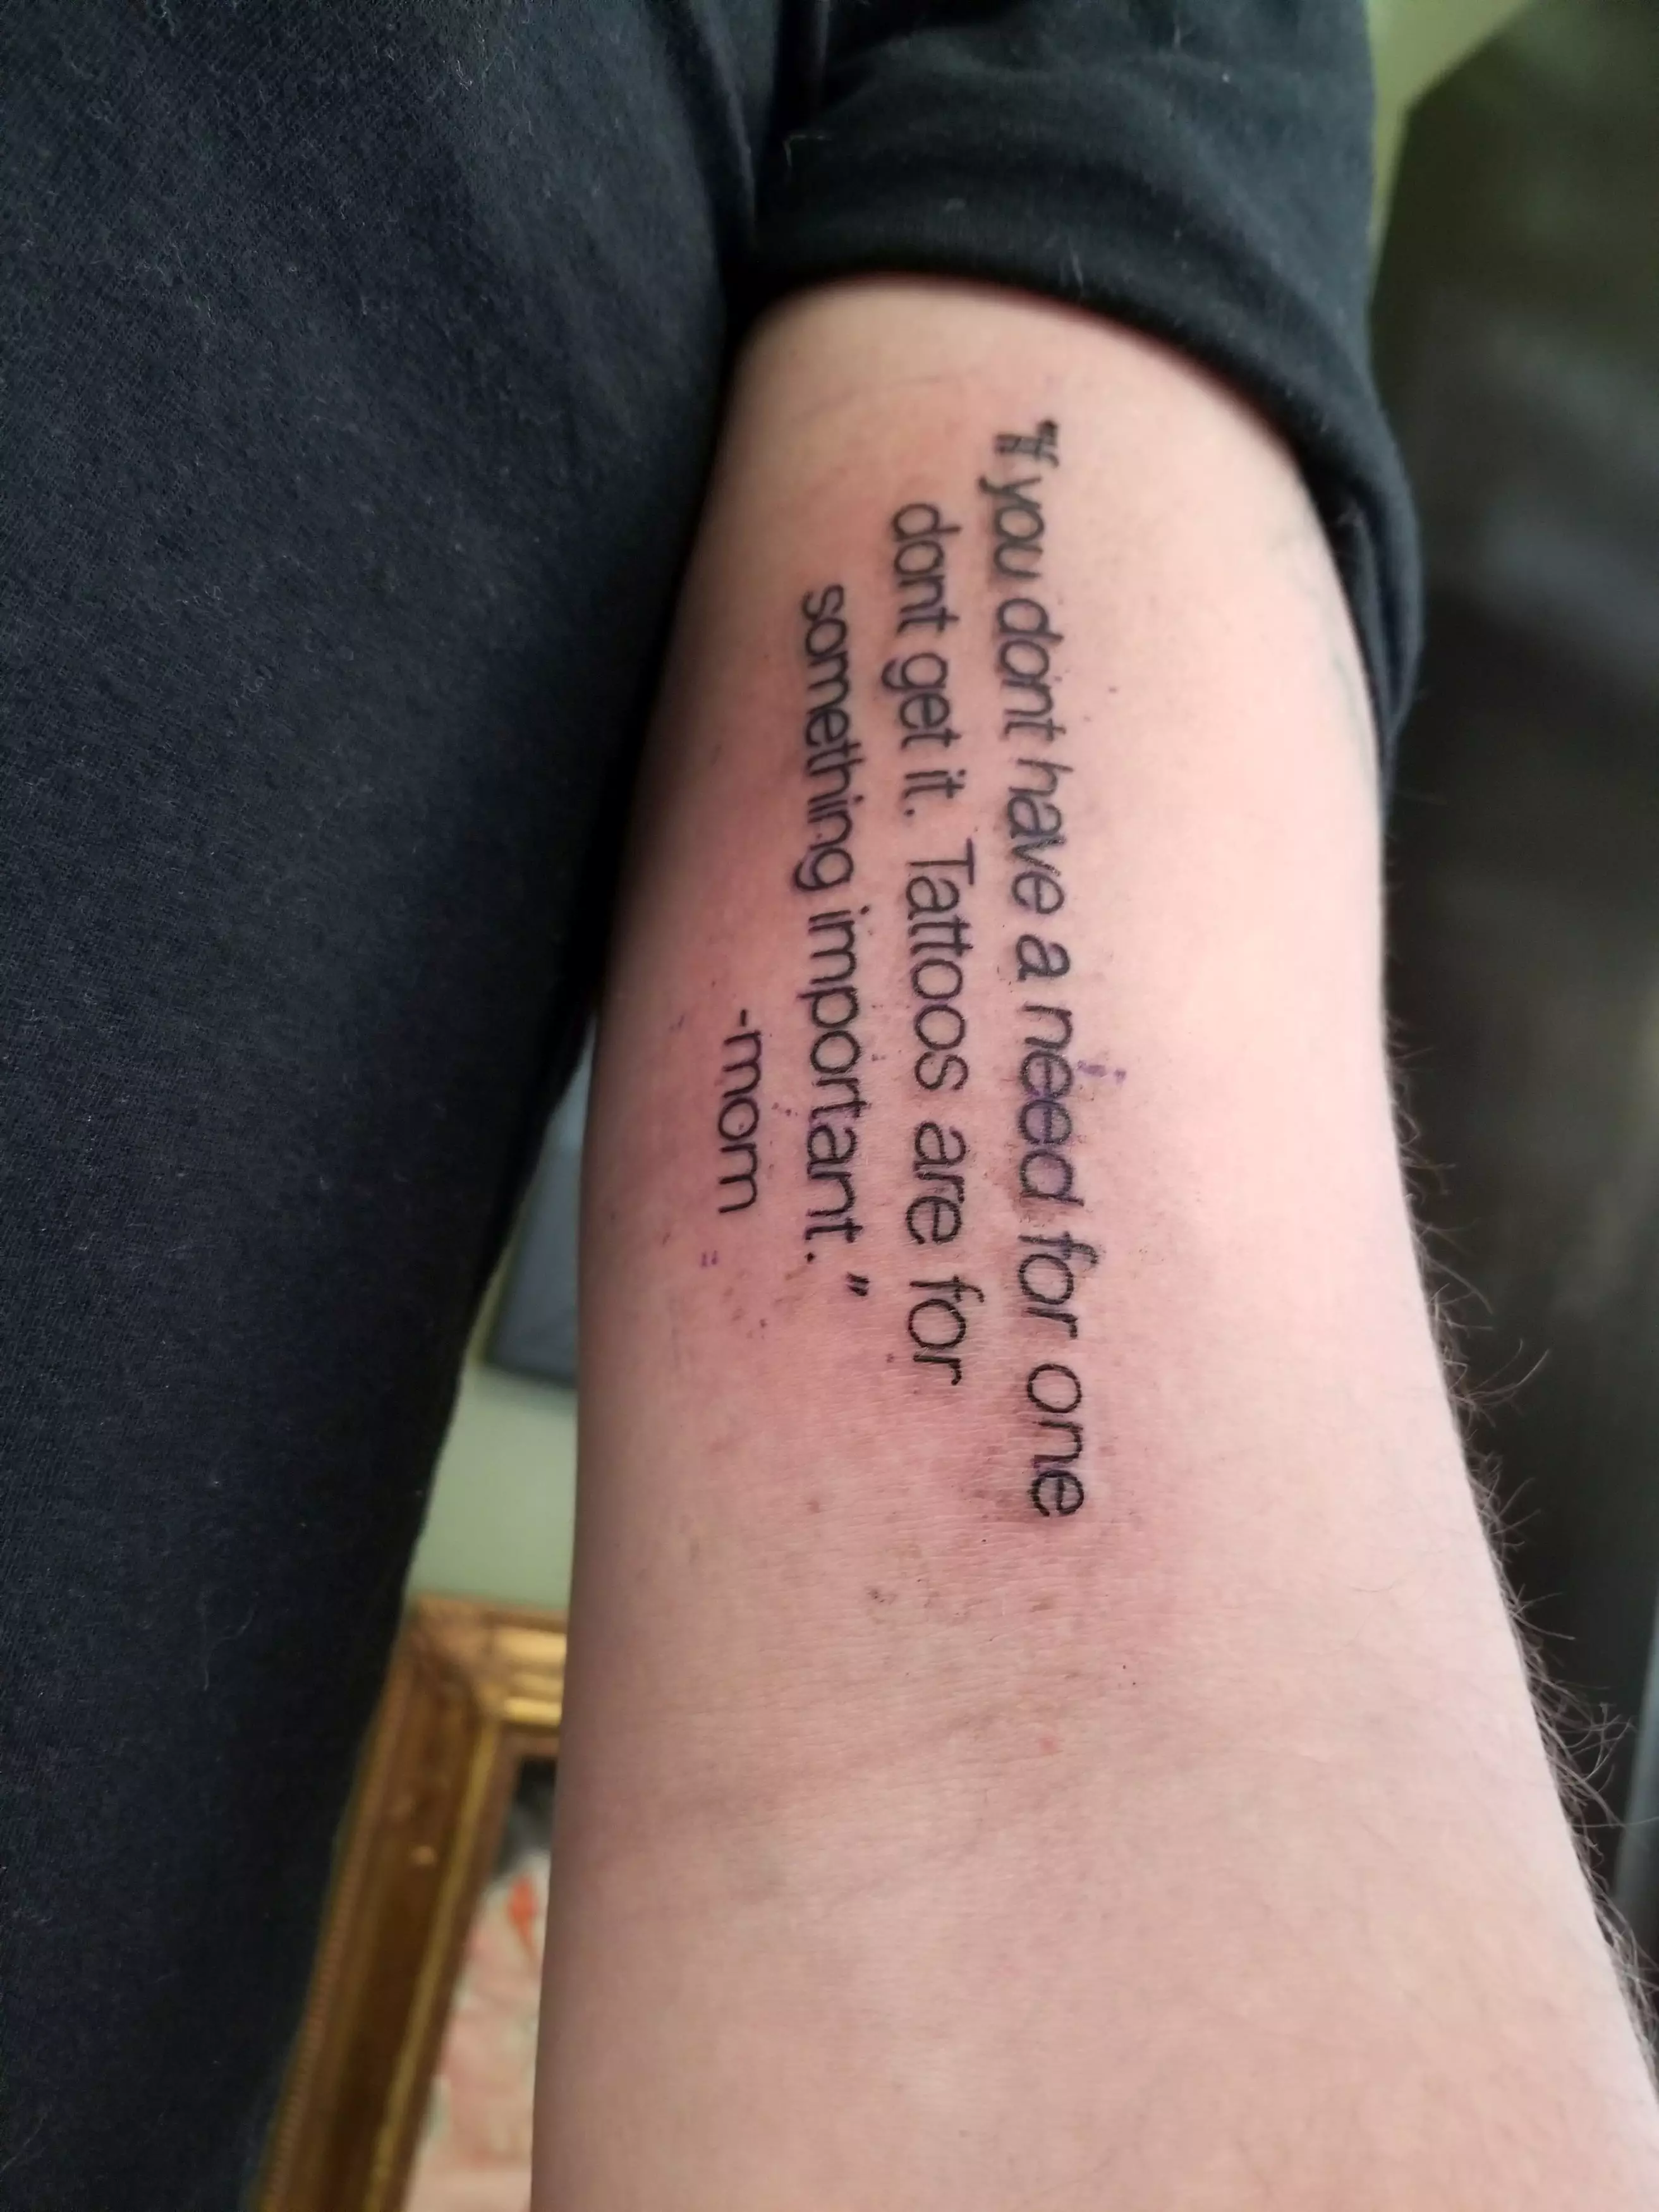 The tat was an exact replica of his mum's text.